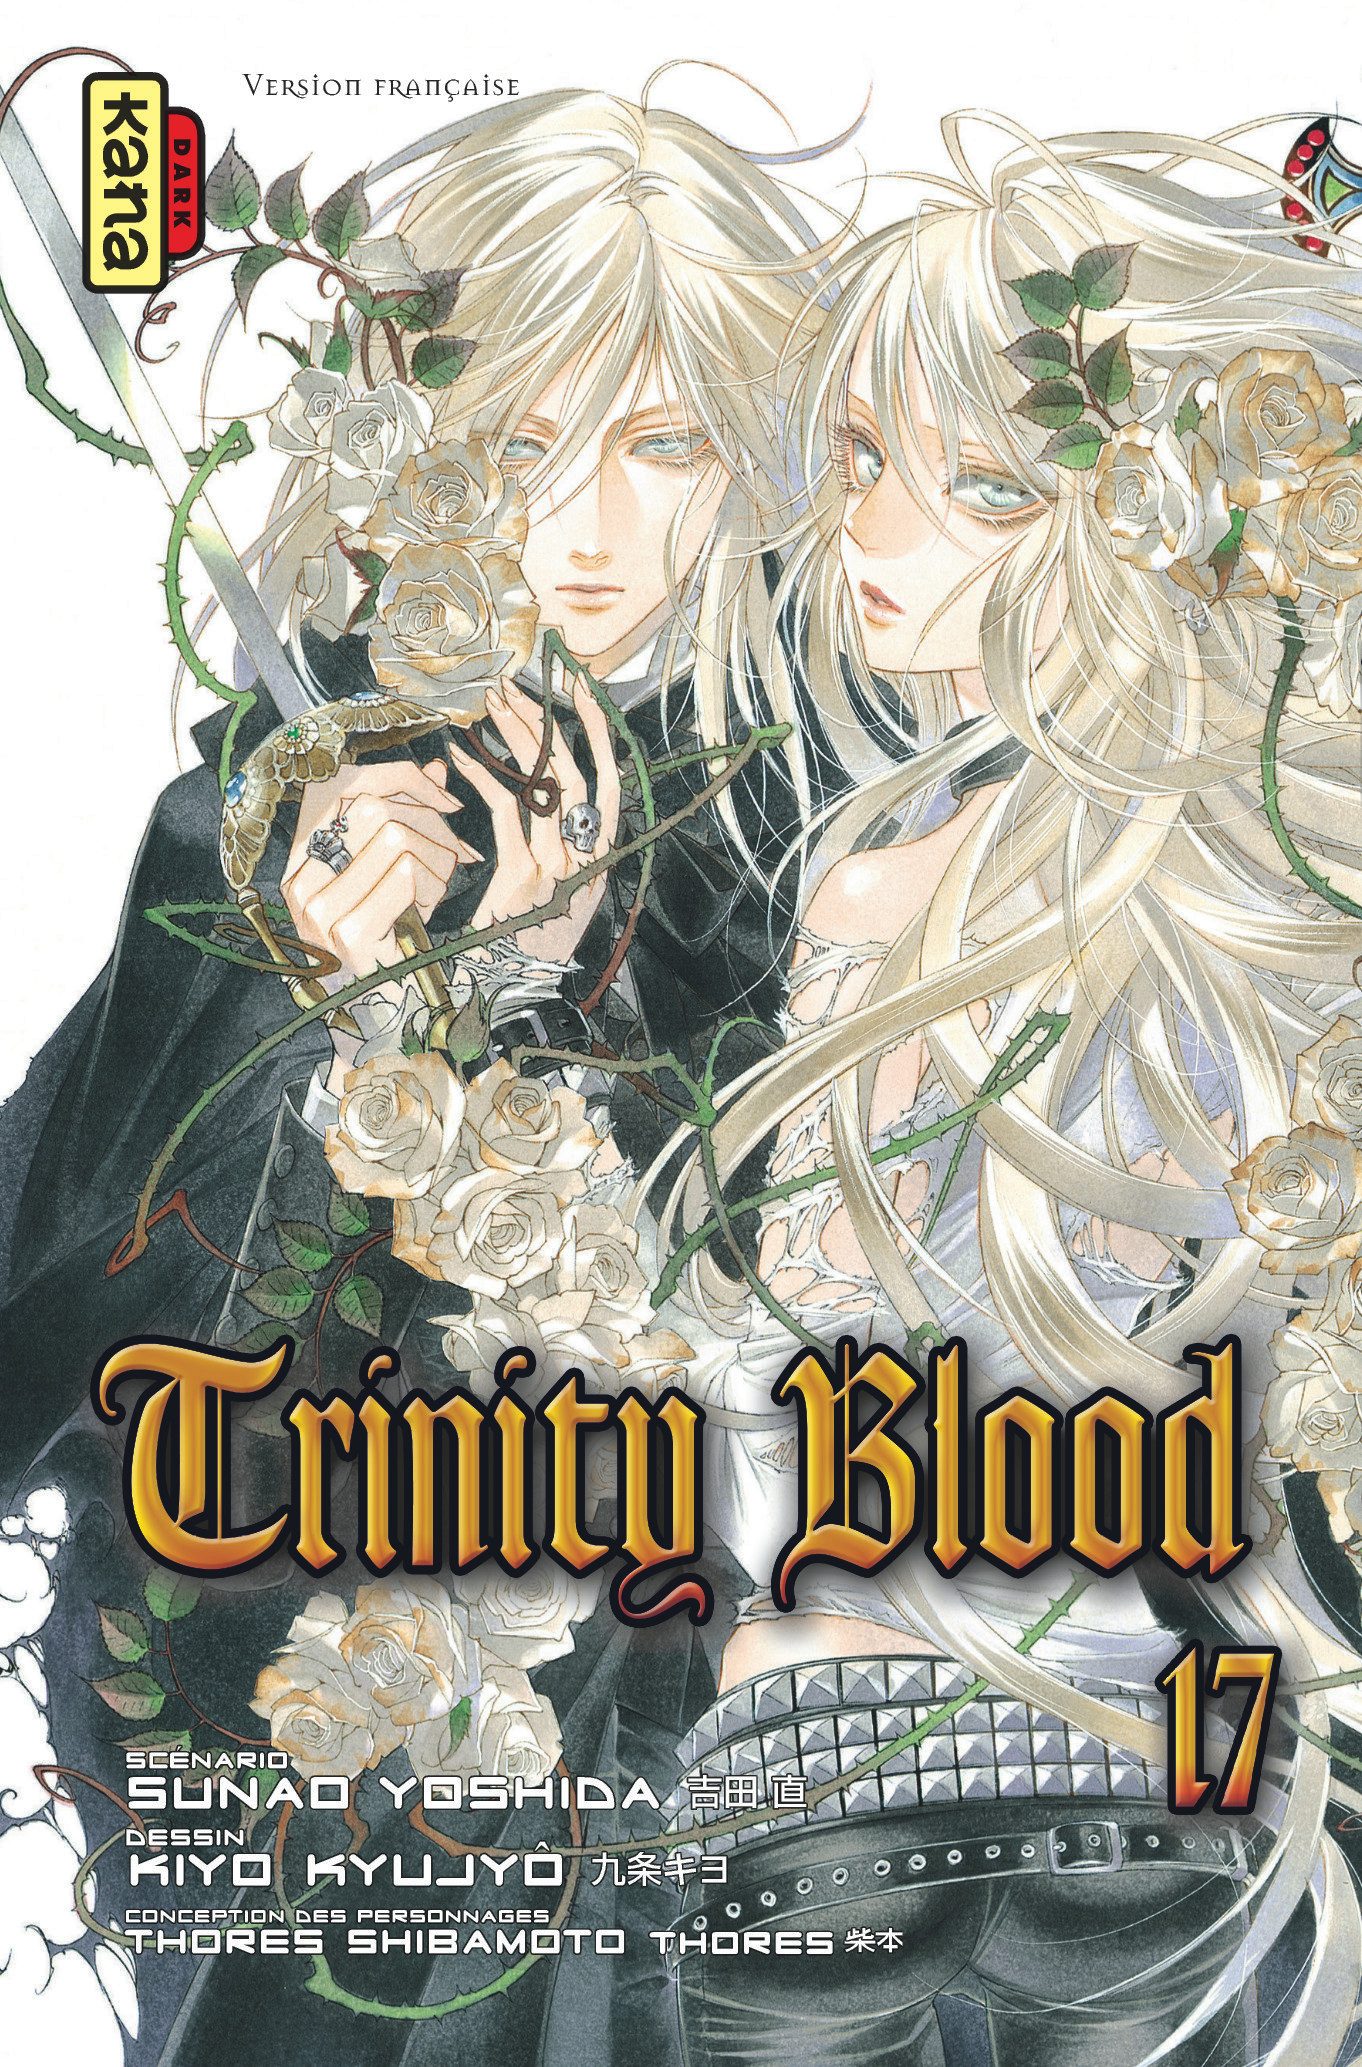 Trinity Blood - Tome 17 (9782505061601-front-cover)